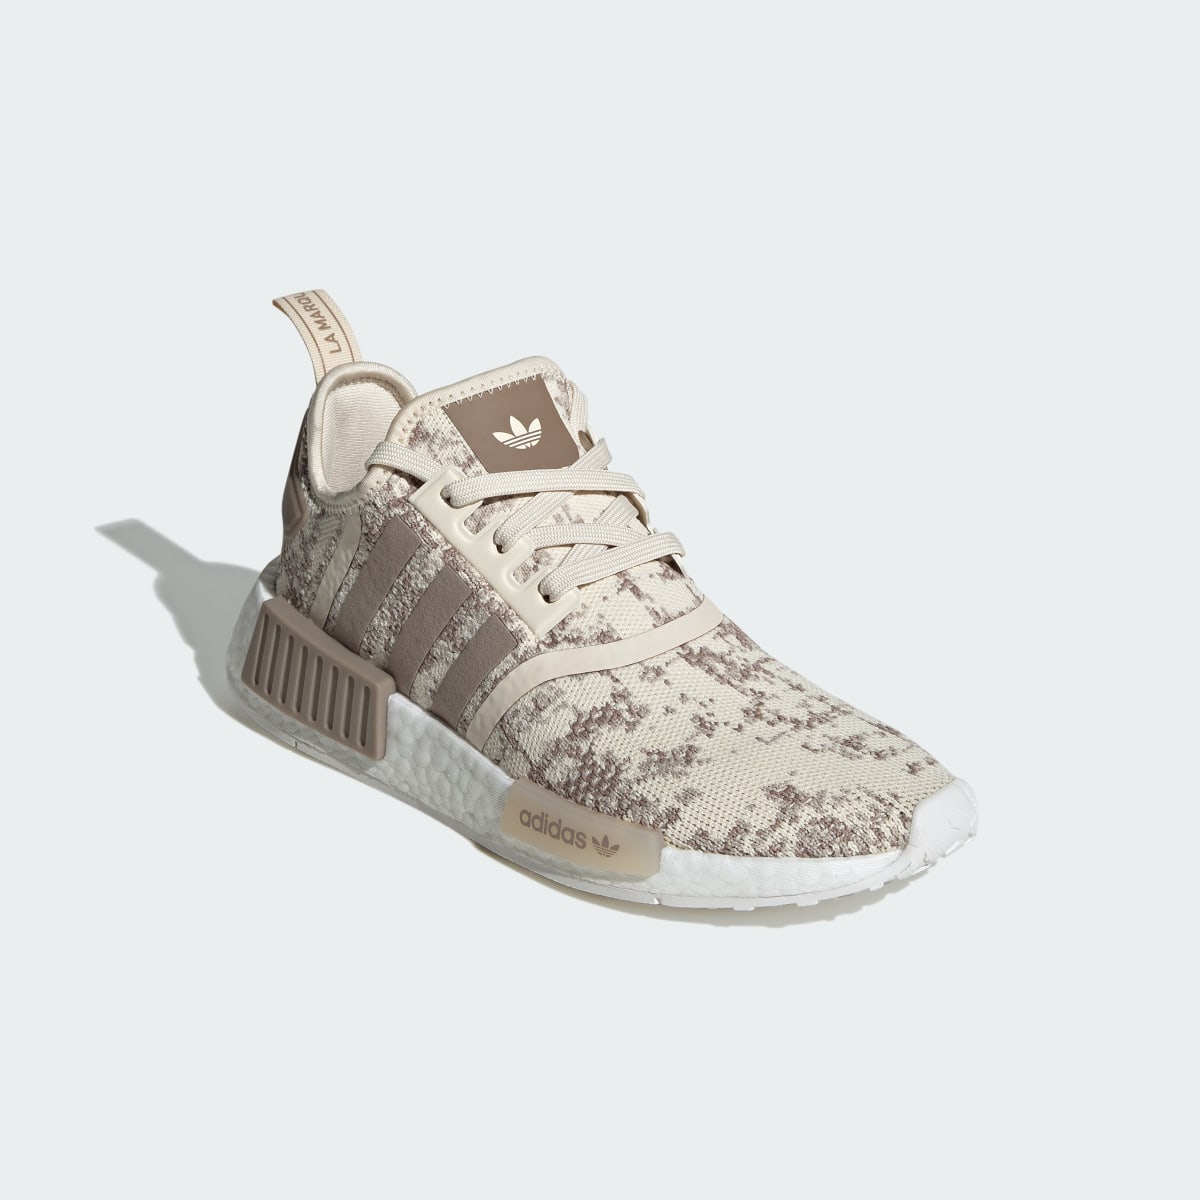 Adidas NMD_R1 Shoes. 5